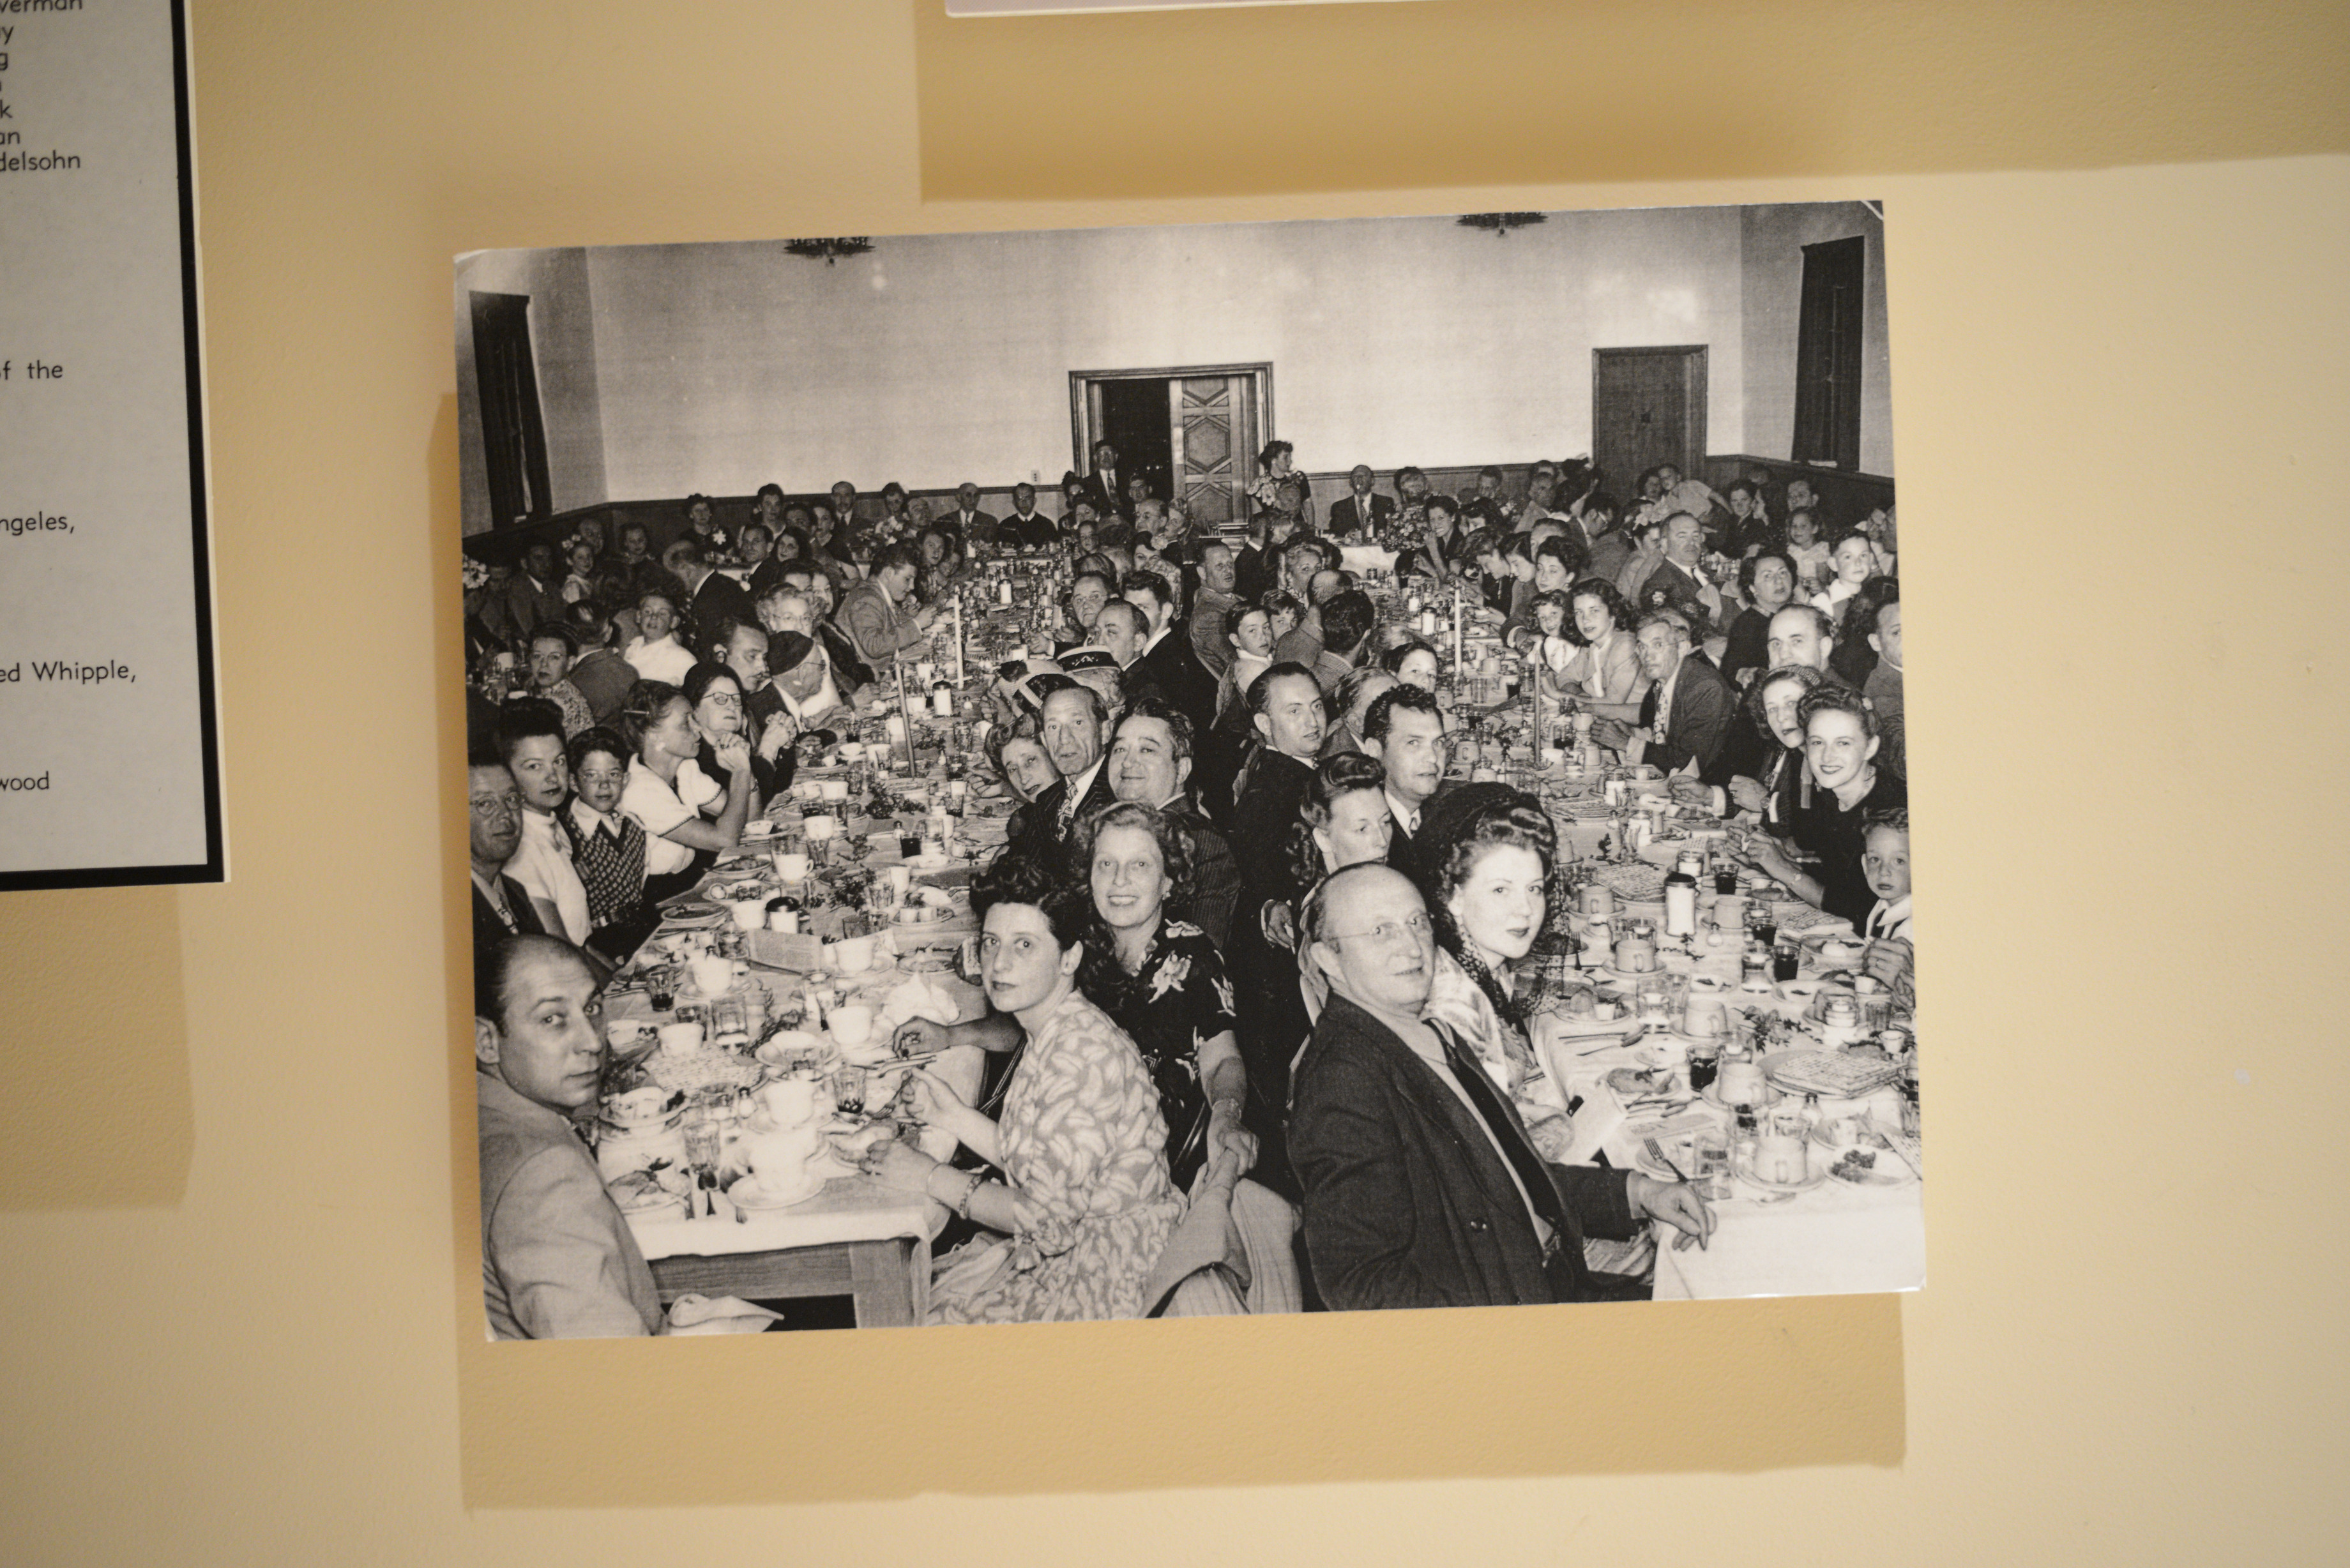 Photograph of large banquet room during an event